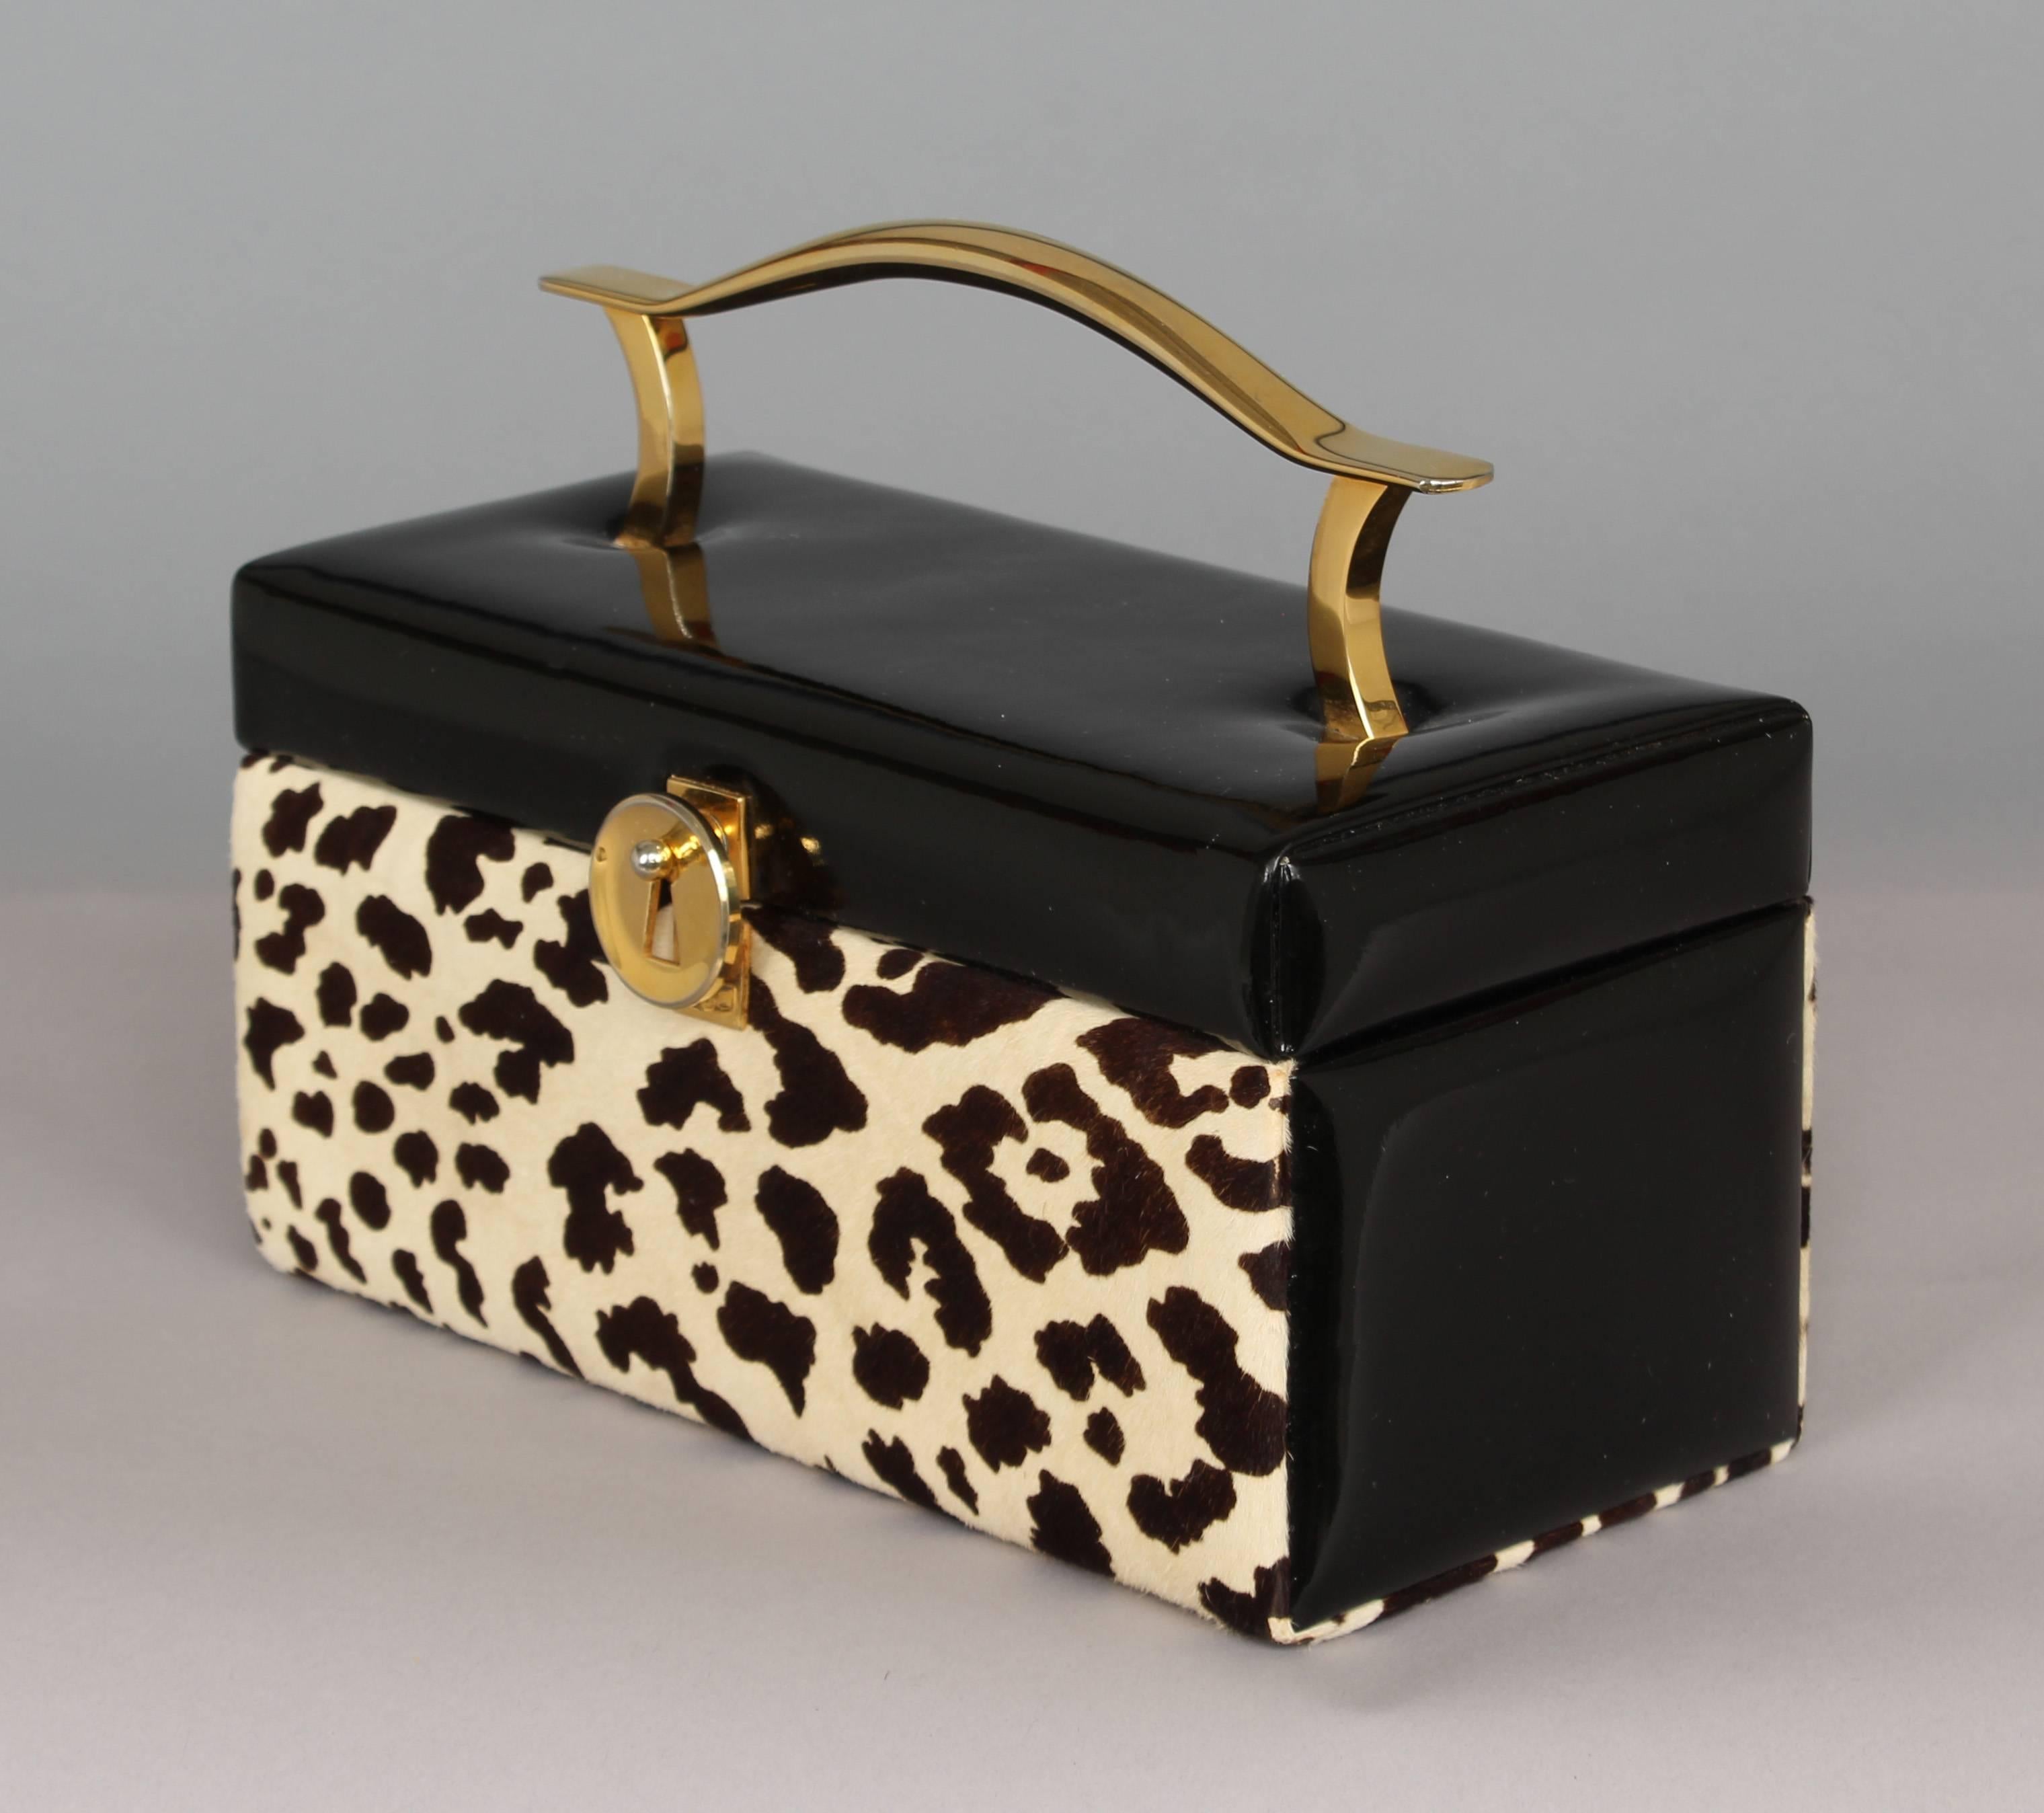 Kored Box shaped handbag in faux leopard and black patent leather, sculptural brass handle, clasp and hinge details. Original purse and mirror included.

Architect, Sandy Littman of Duesenberg LTD.  and The American Glass Light Company have been